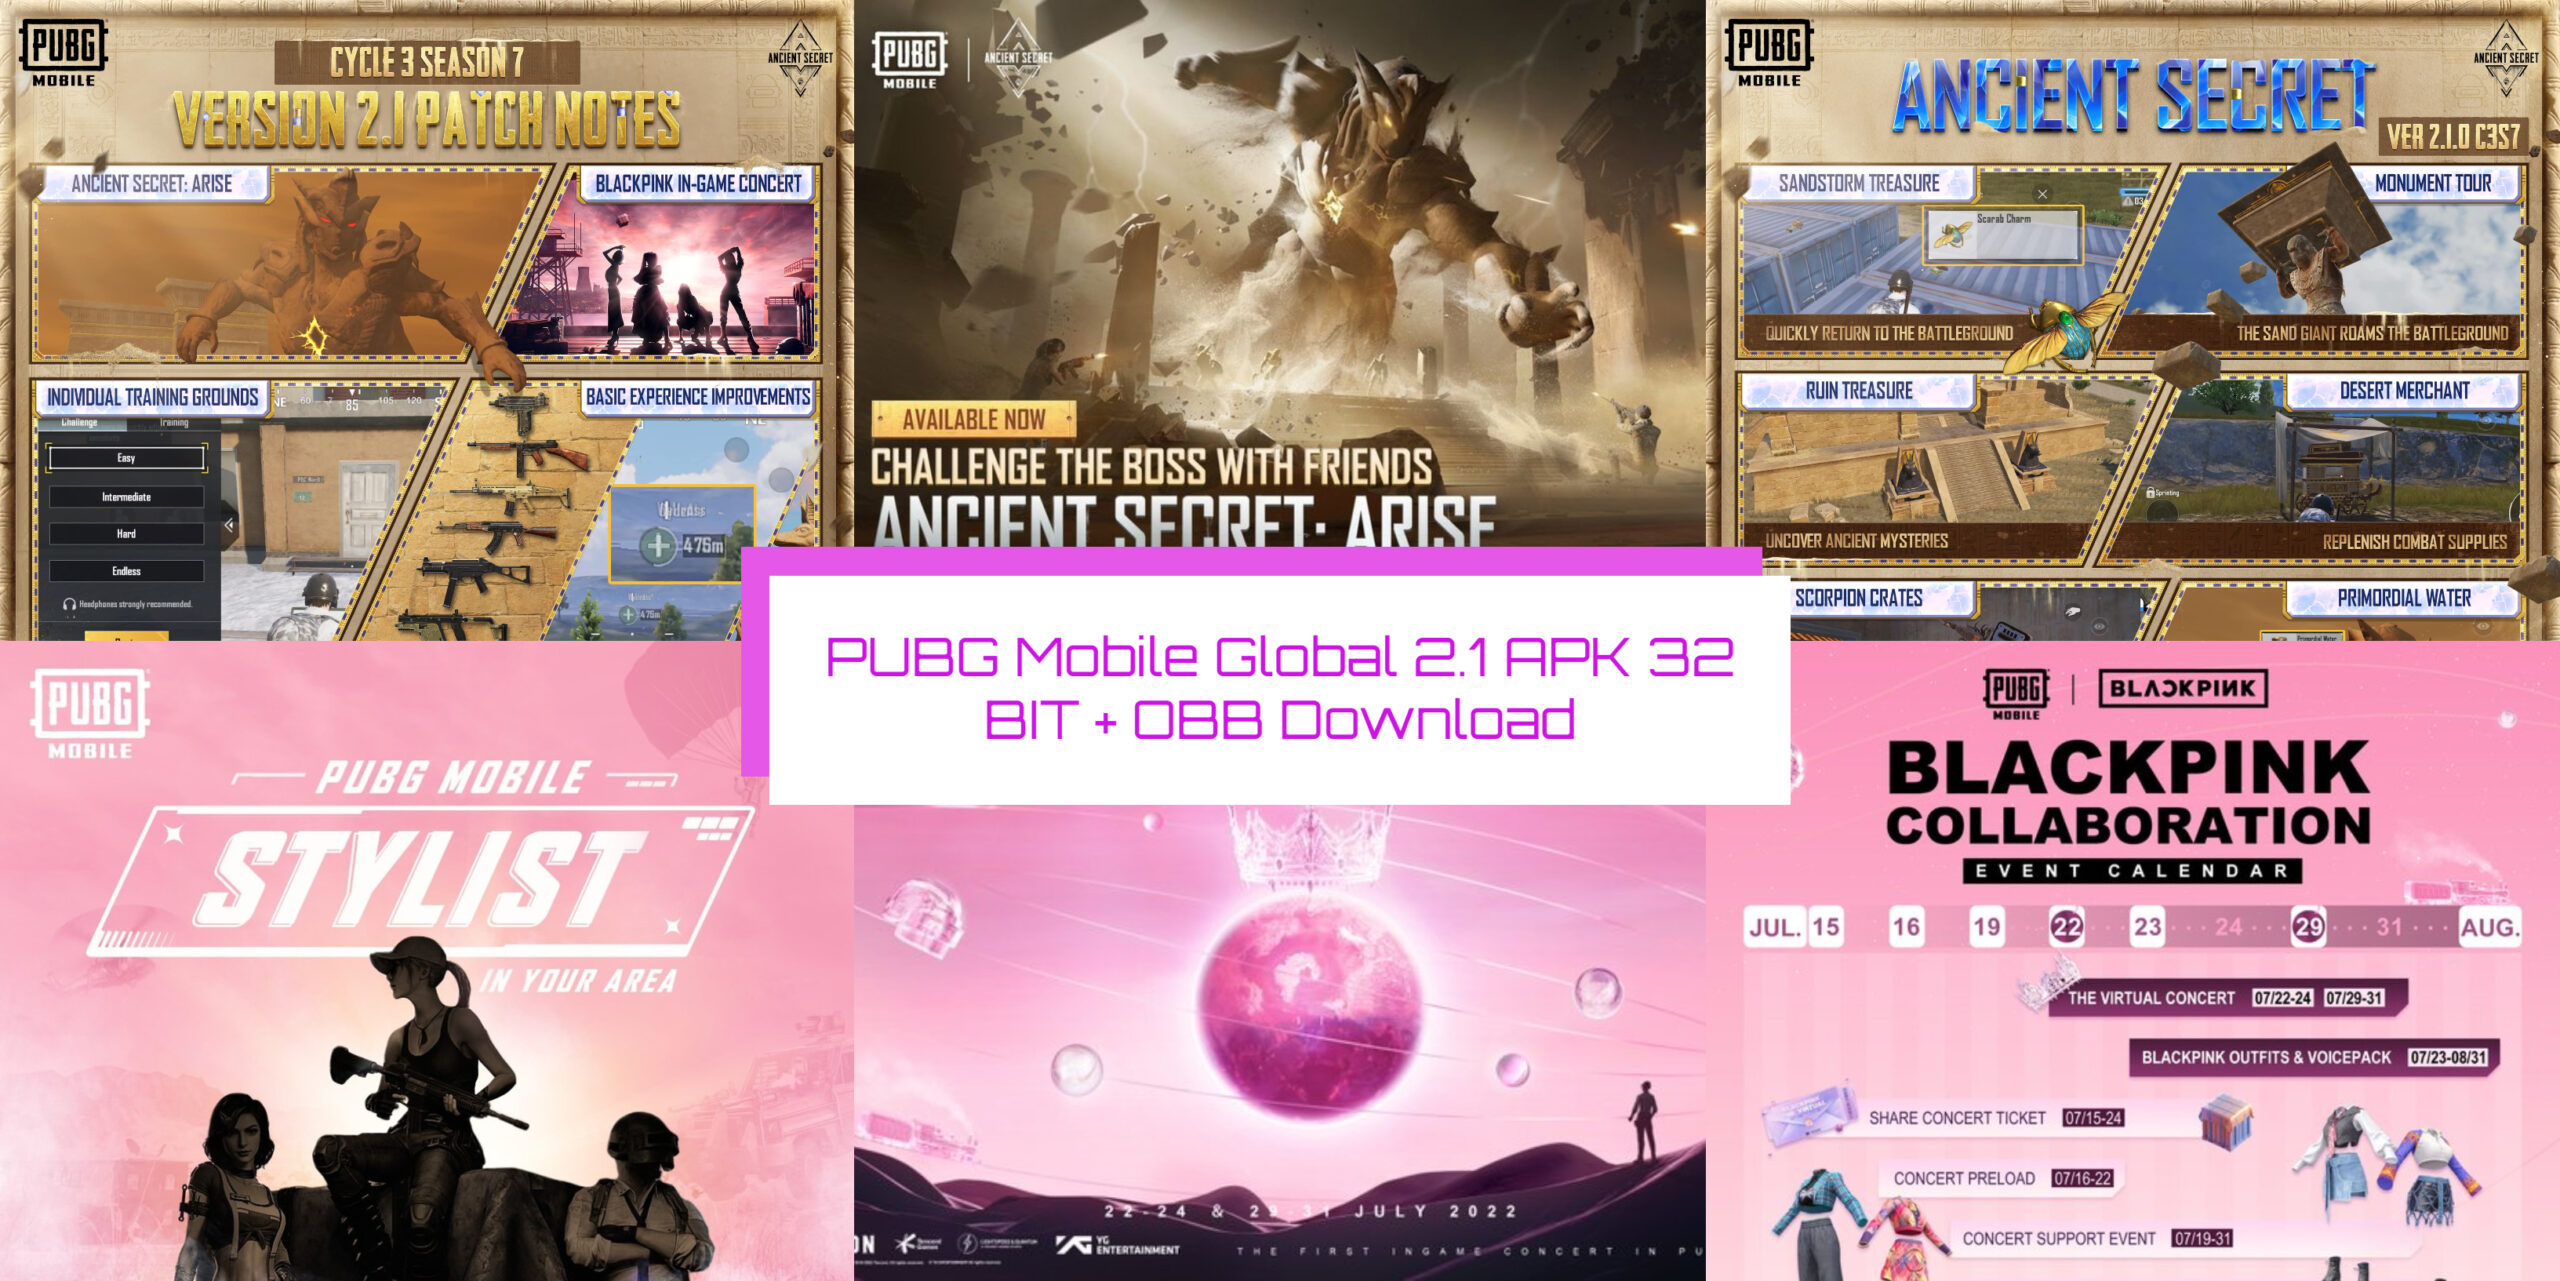 You are currently viewing PUBG Mobile GL 2.1.0 APK 32 BIT + OBB Download